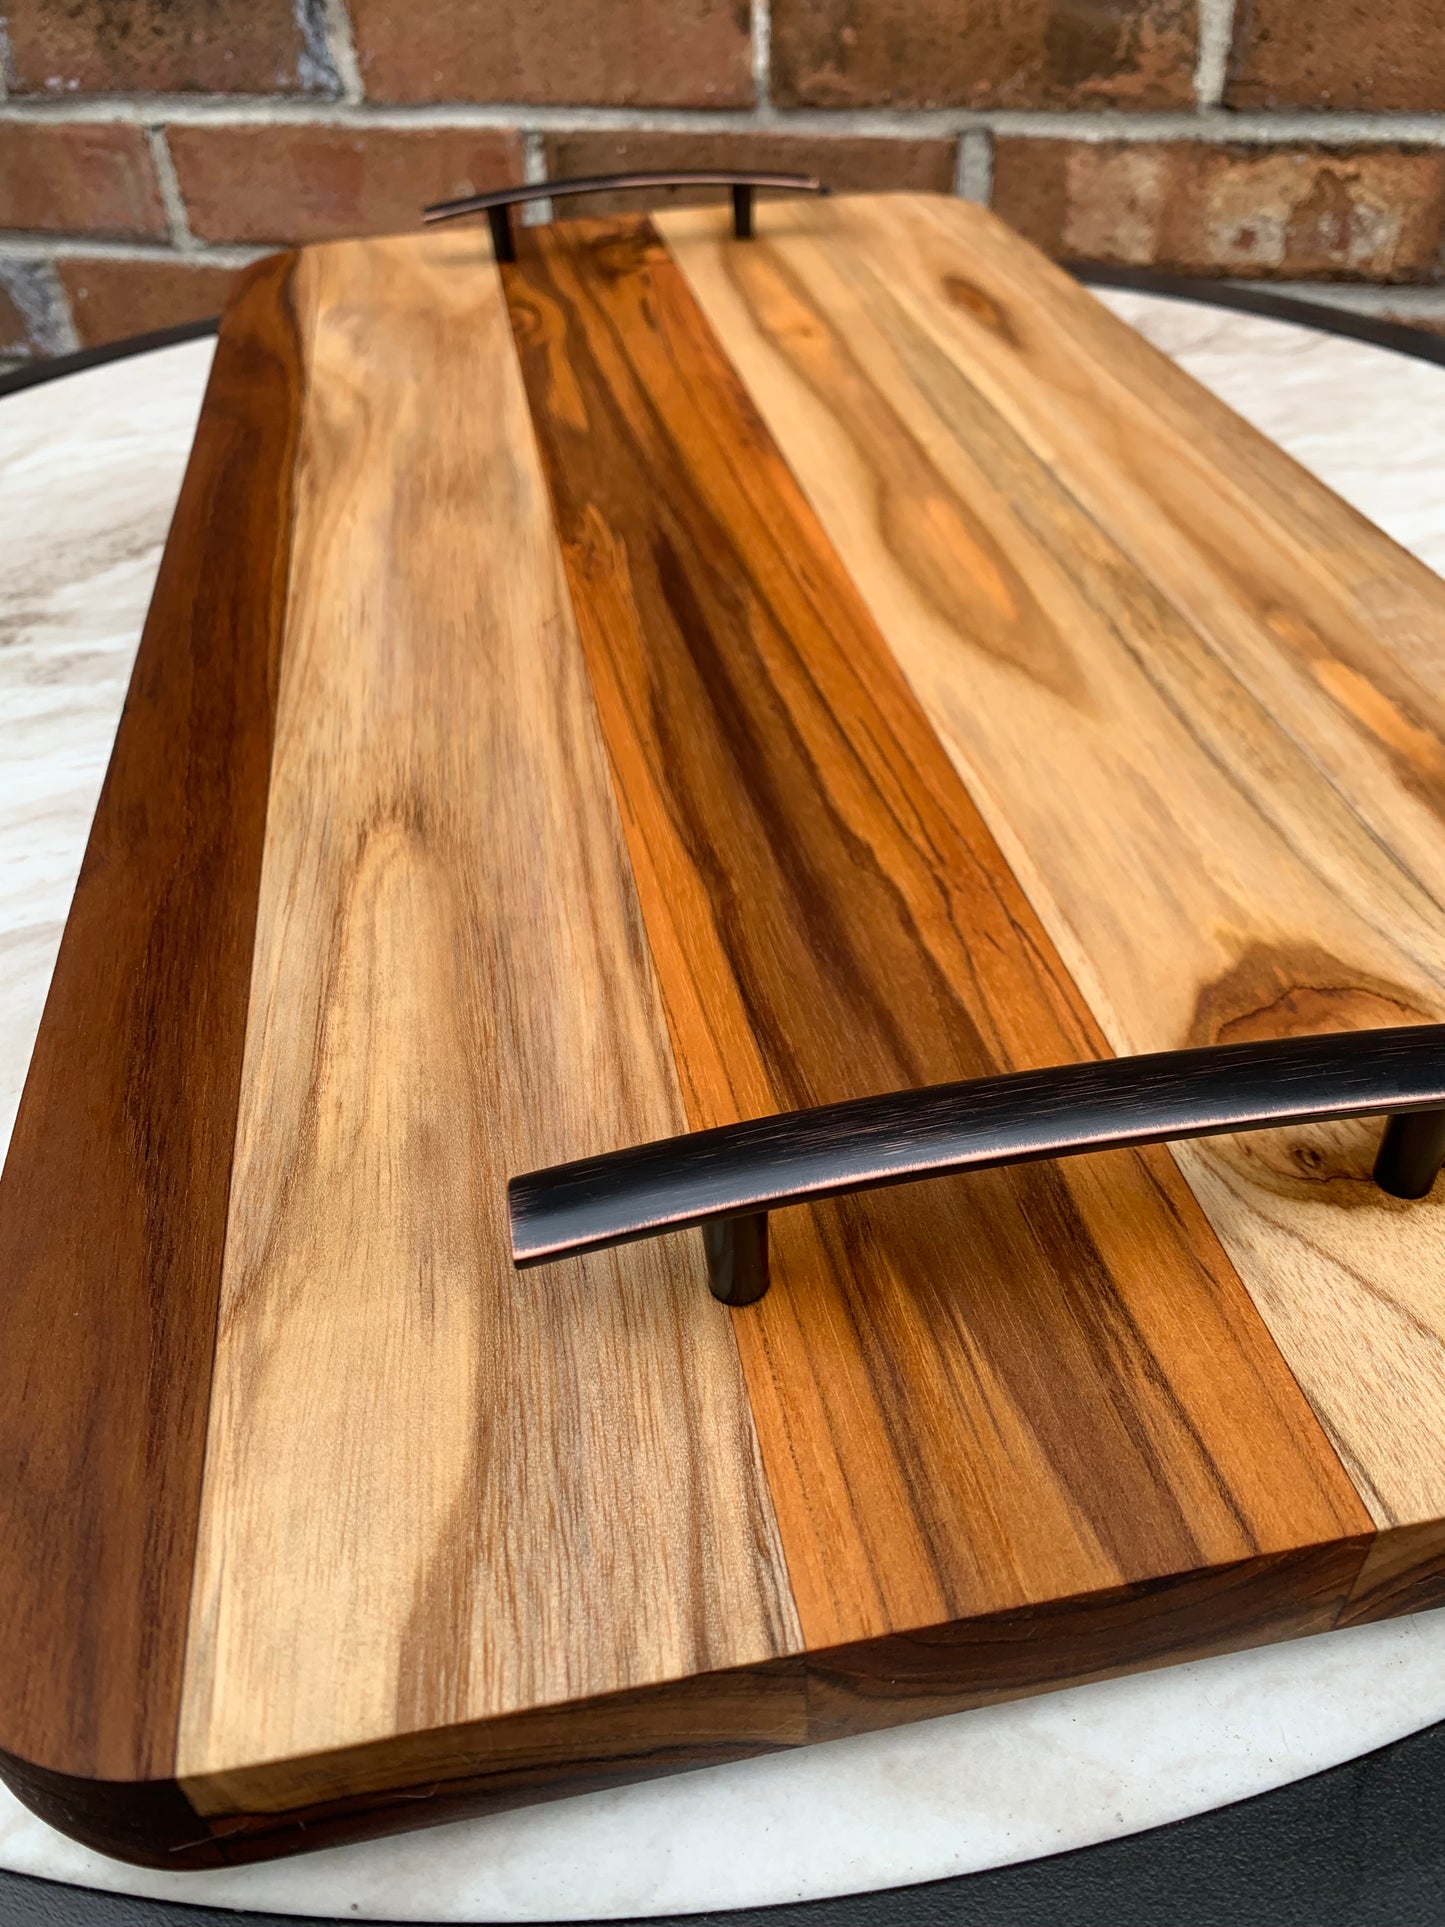 Teak wood charcuterie board, cutting board, cheese board, serving tray with handles